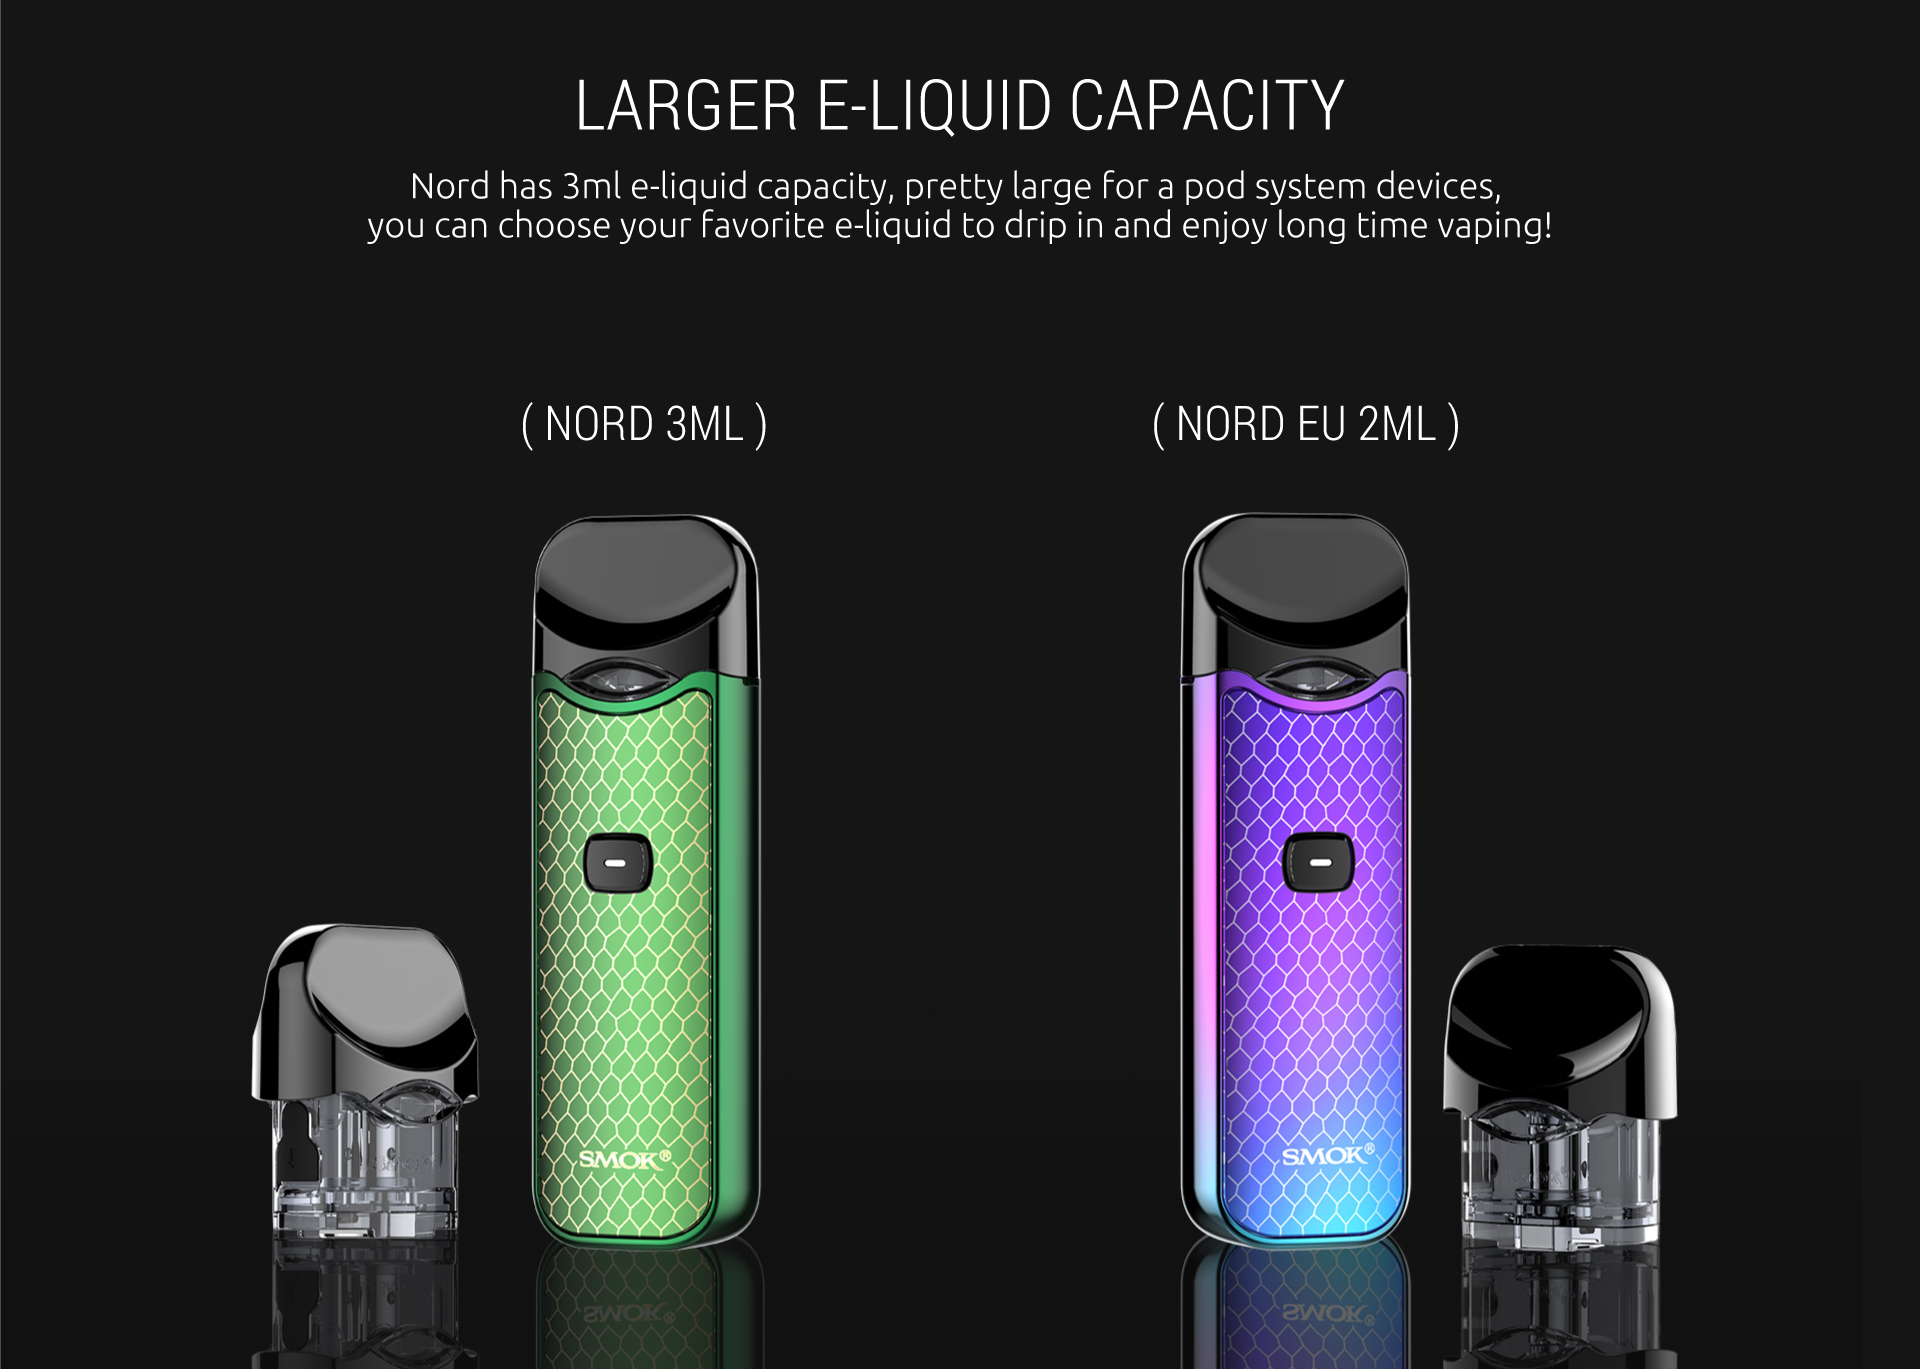 Nord Kit — A new pod system for multiple and lungful vaping experiences